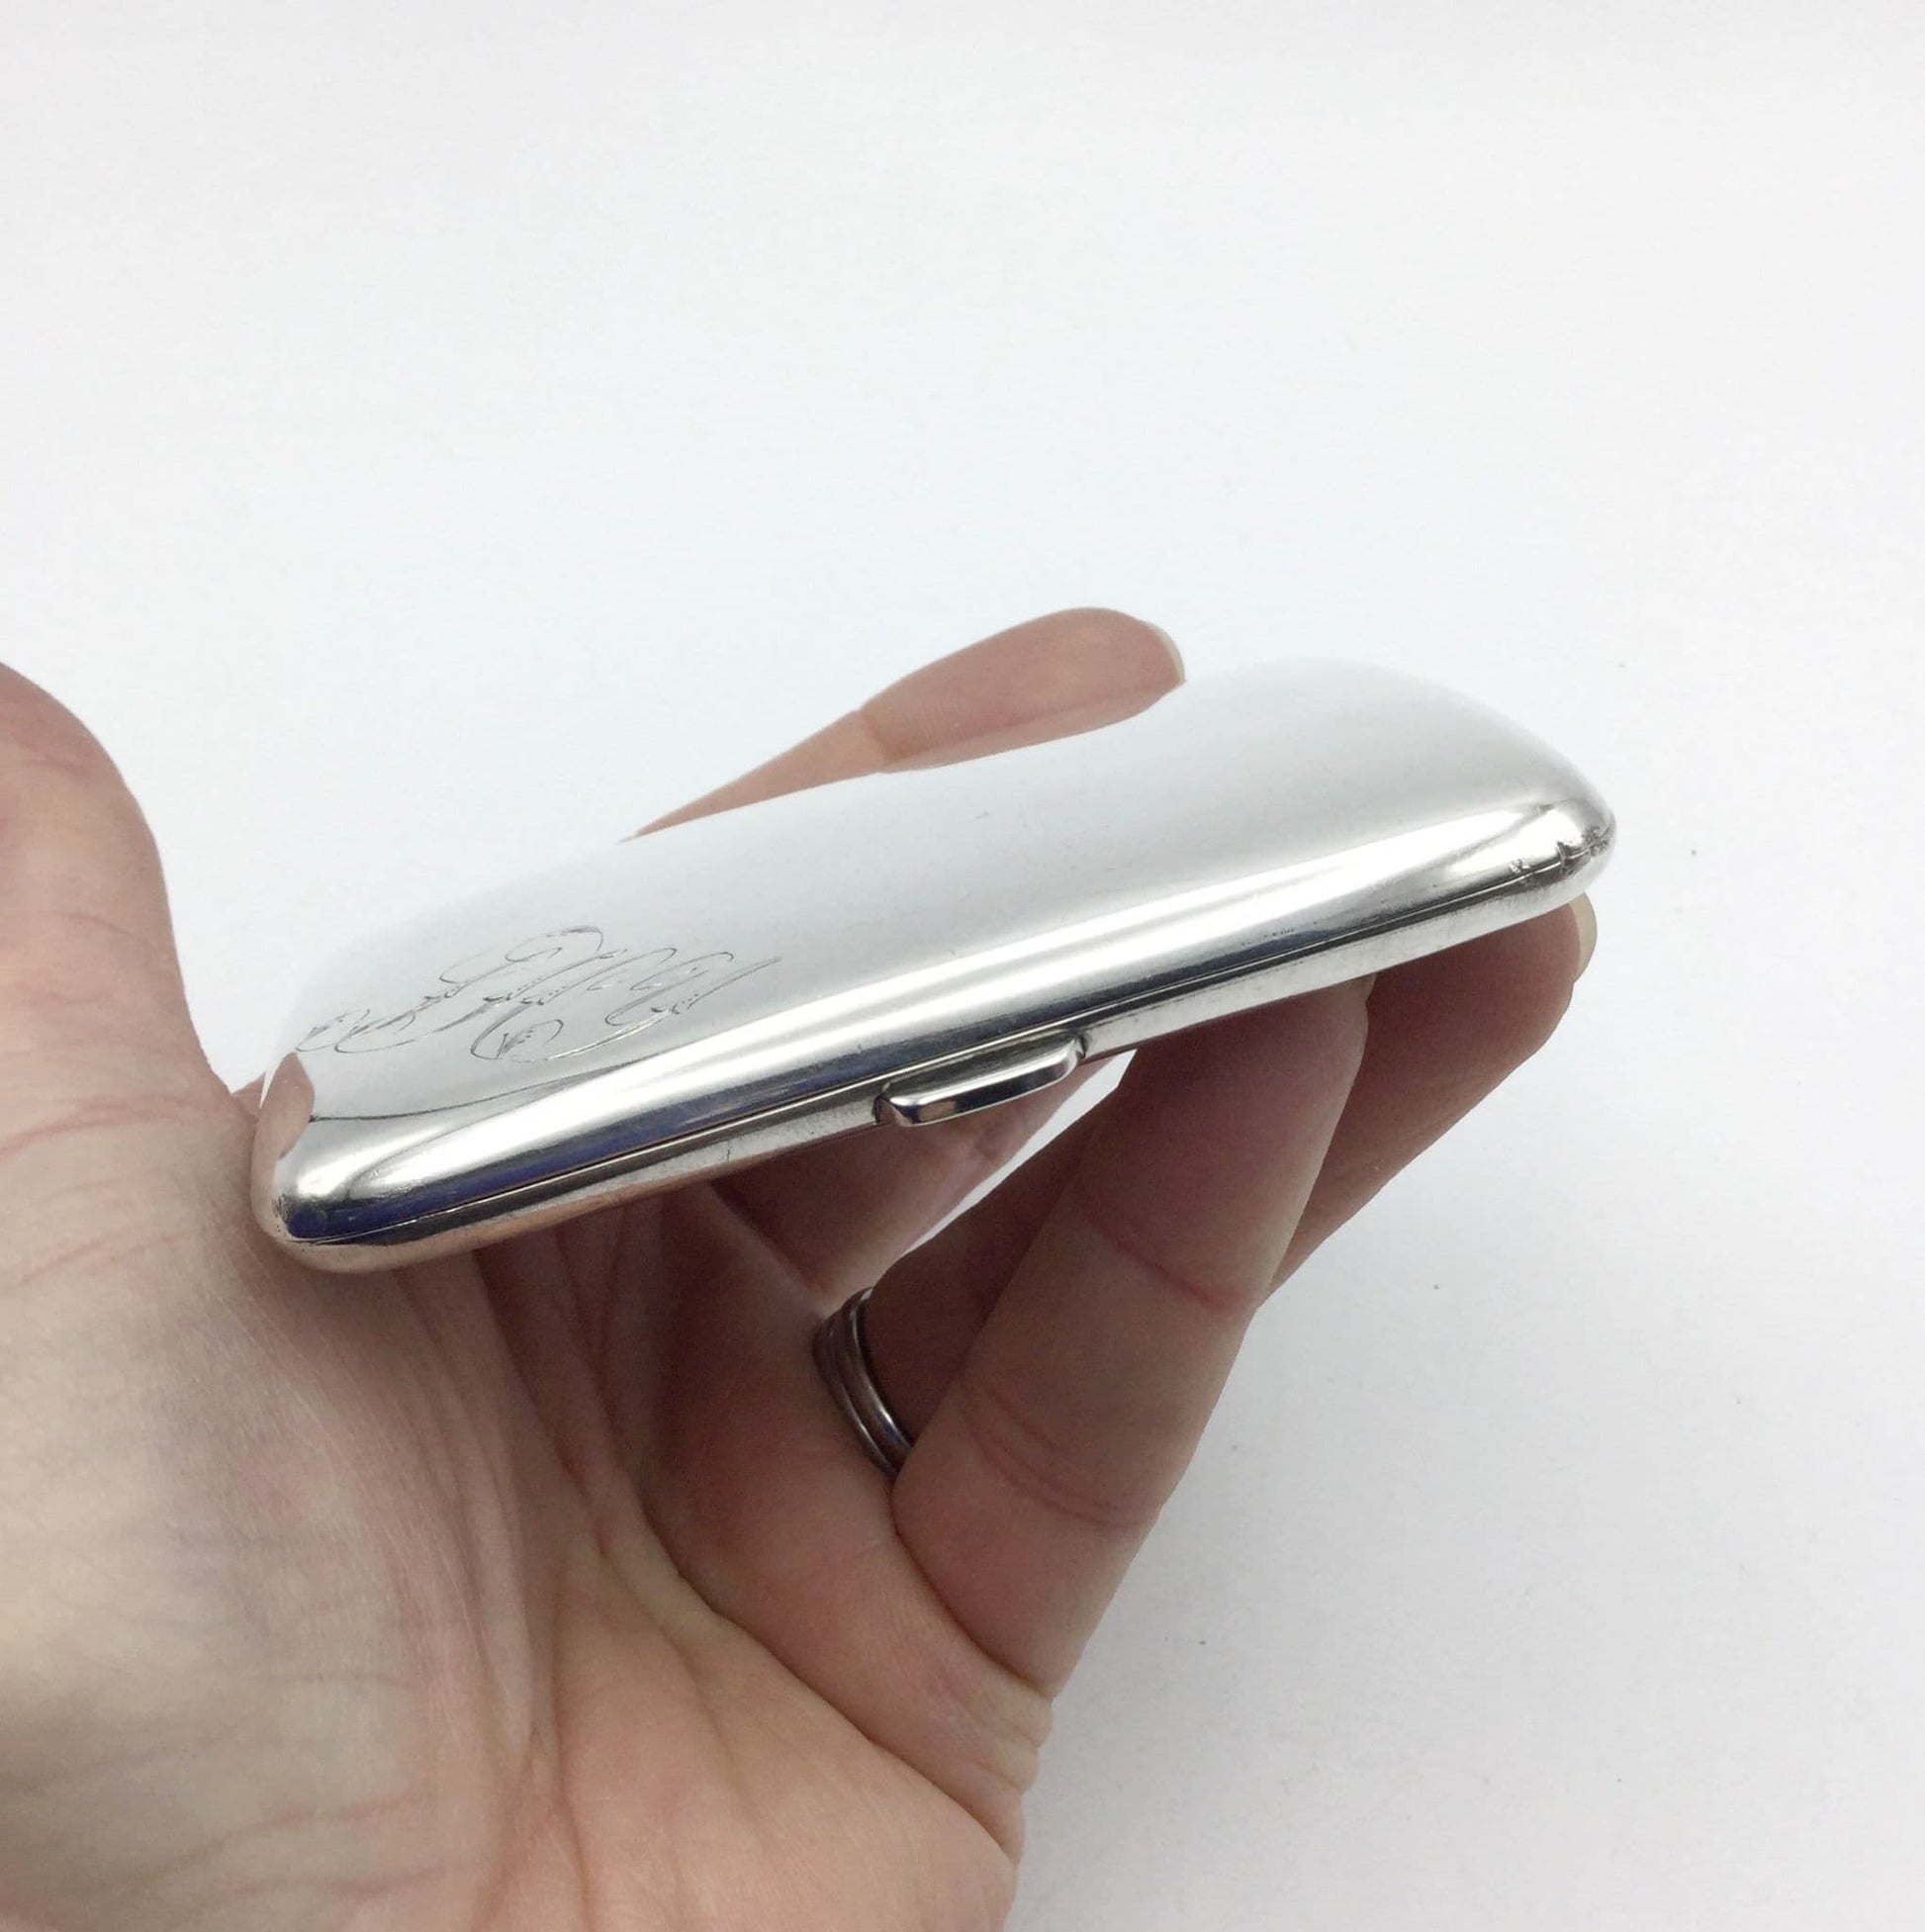 side view of antique silver cigarette case showing the clasp and held in a hand